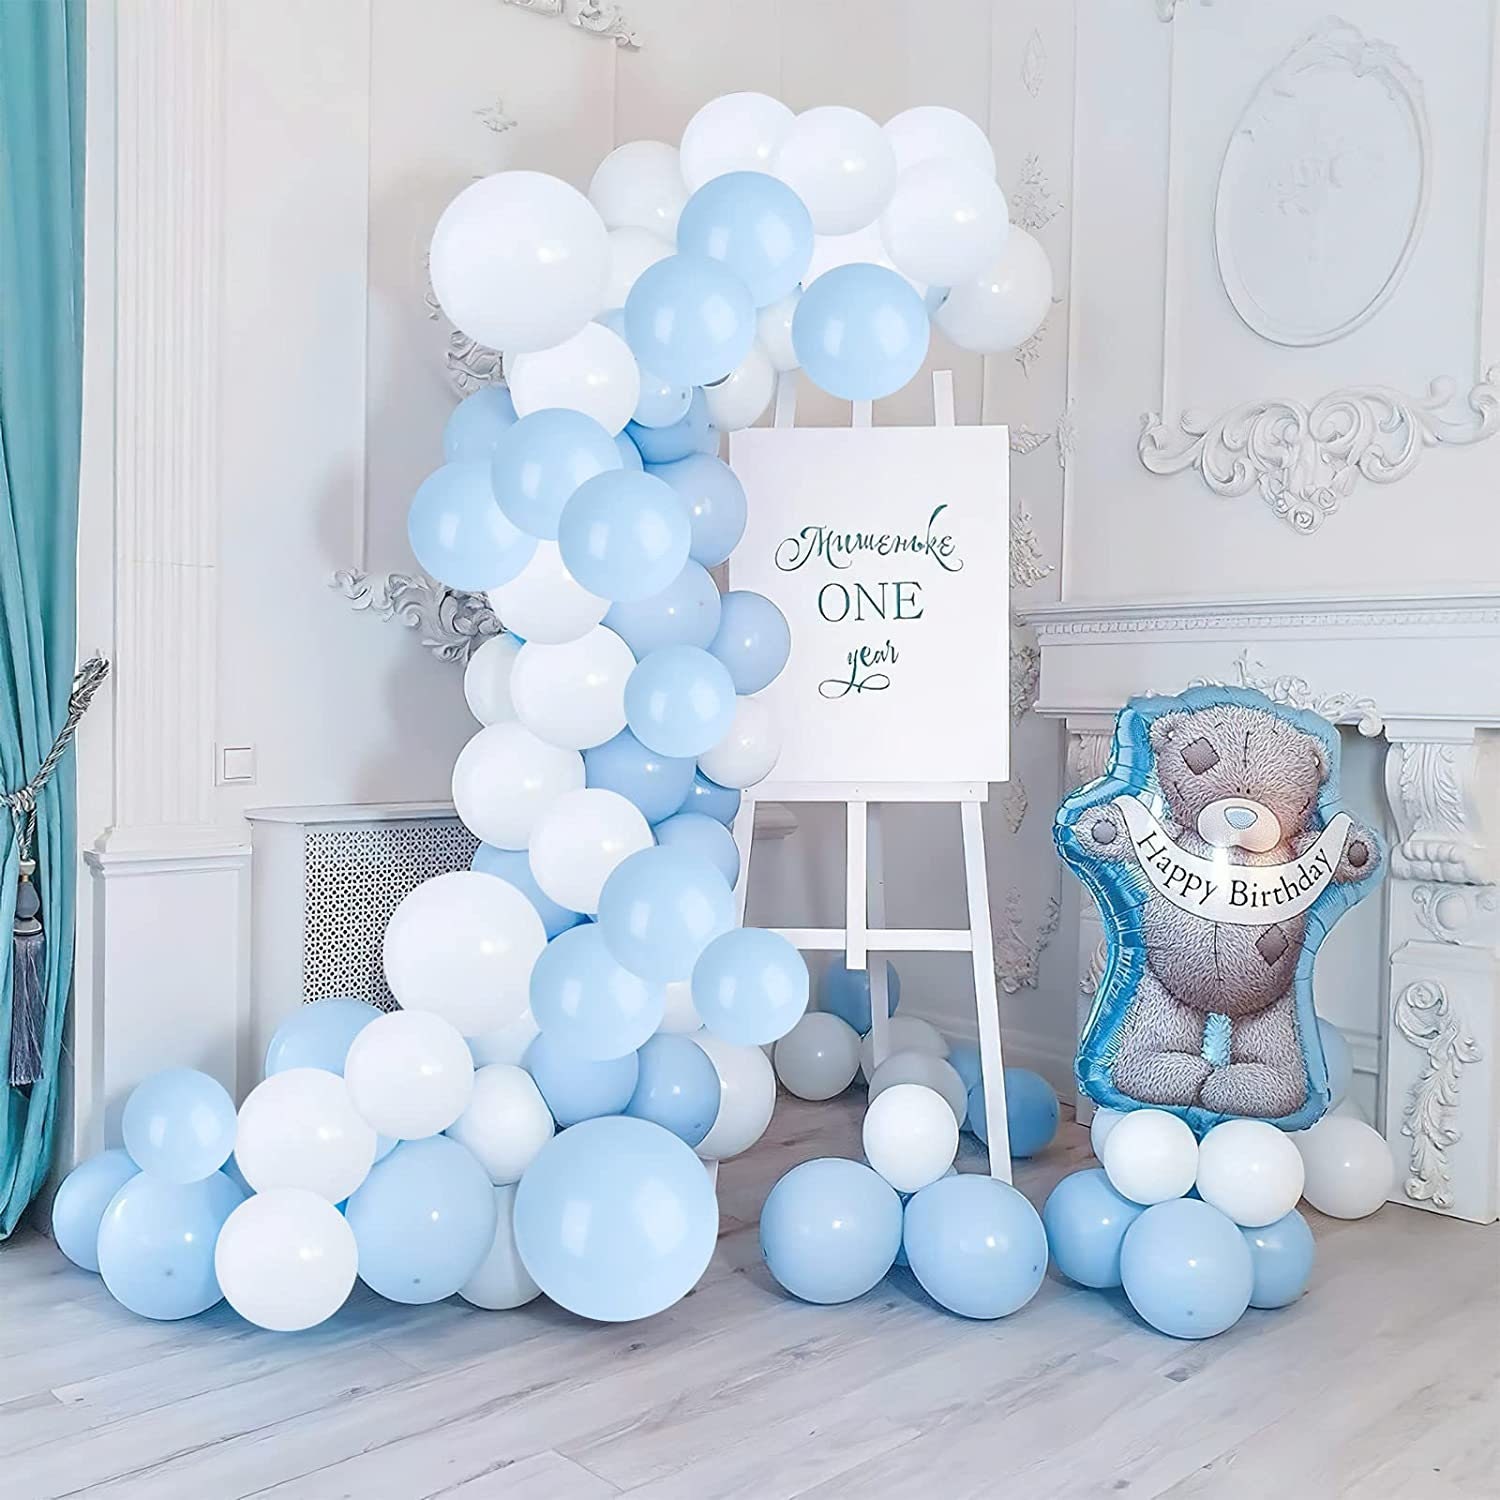 Light Blue and White Balloon Arch Kit Birthday Party - Etsy